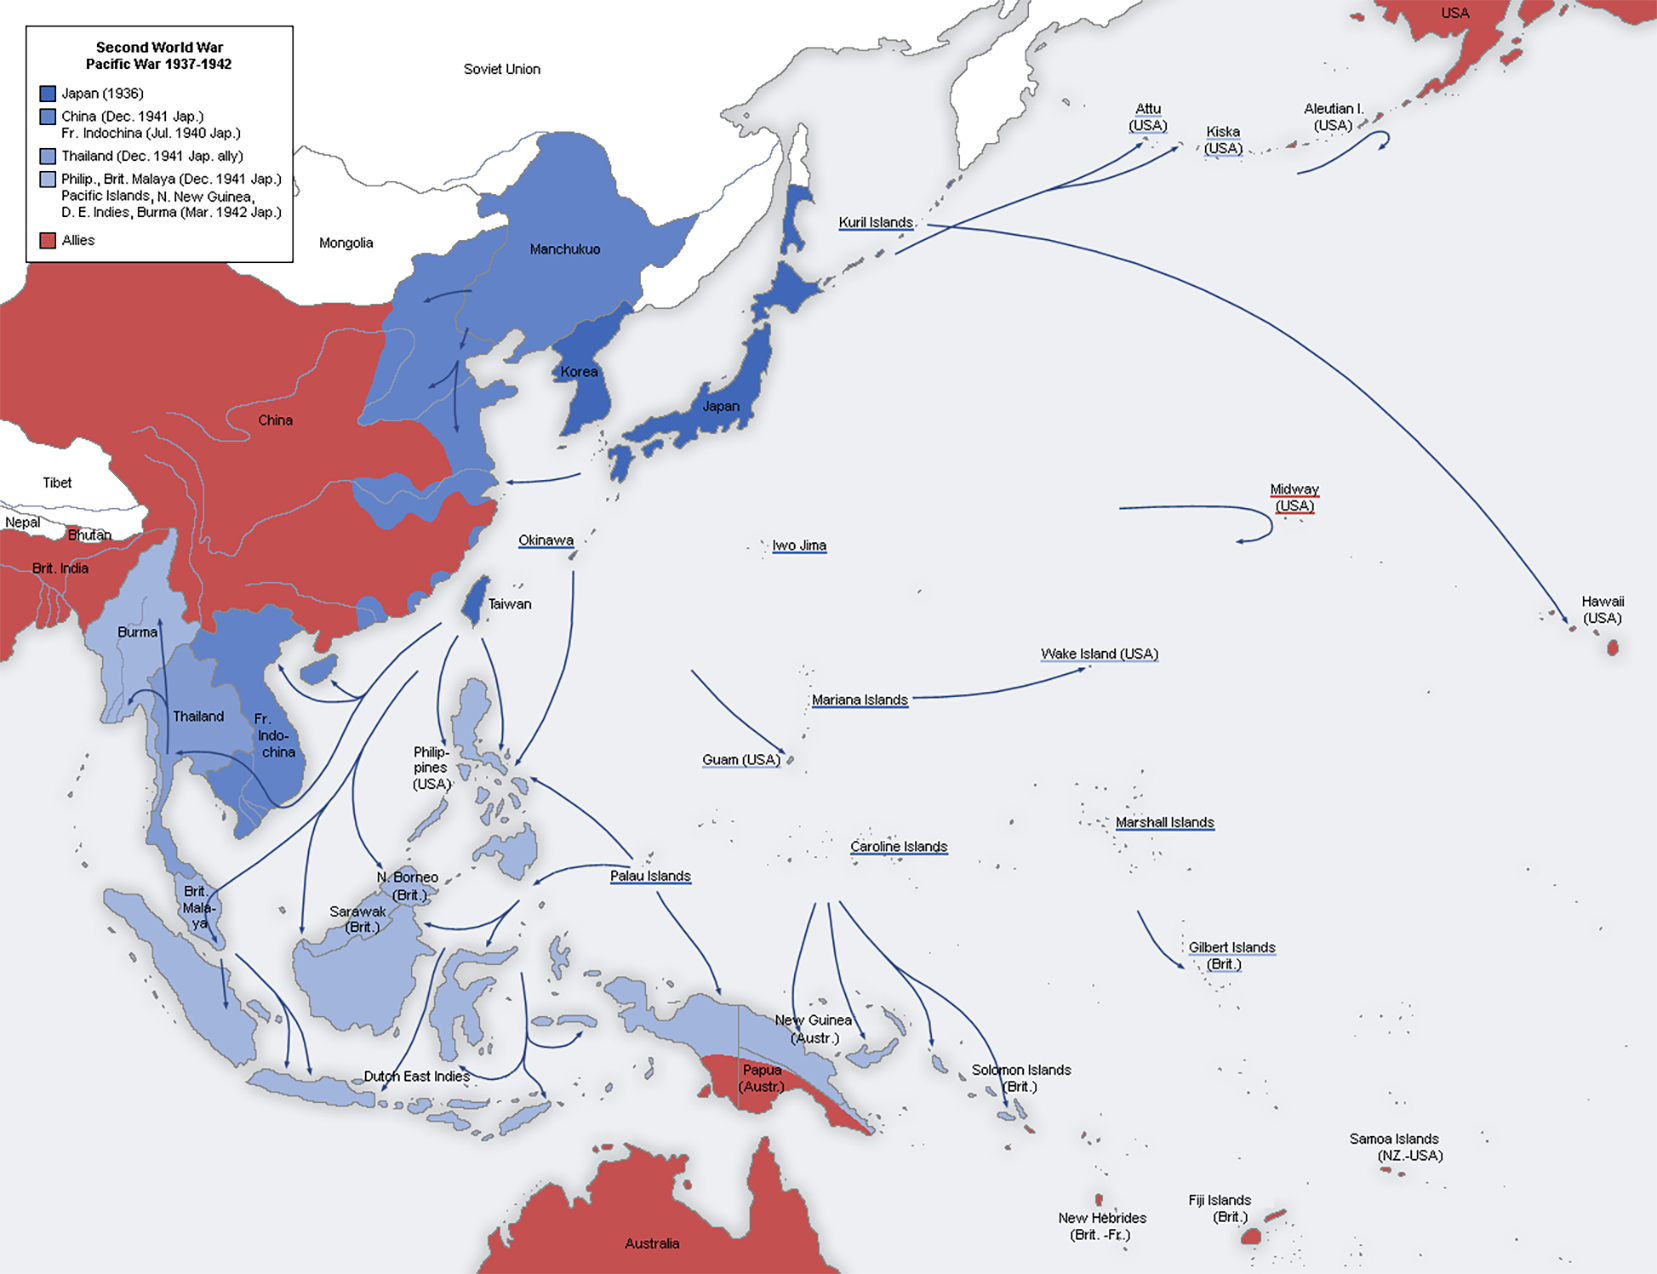 <p>Map showing Japanese advances during the Second World War,1937-42</p>
